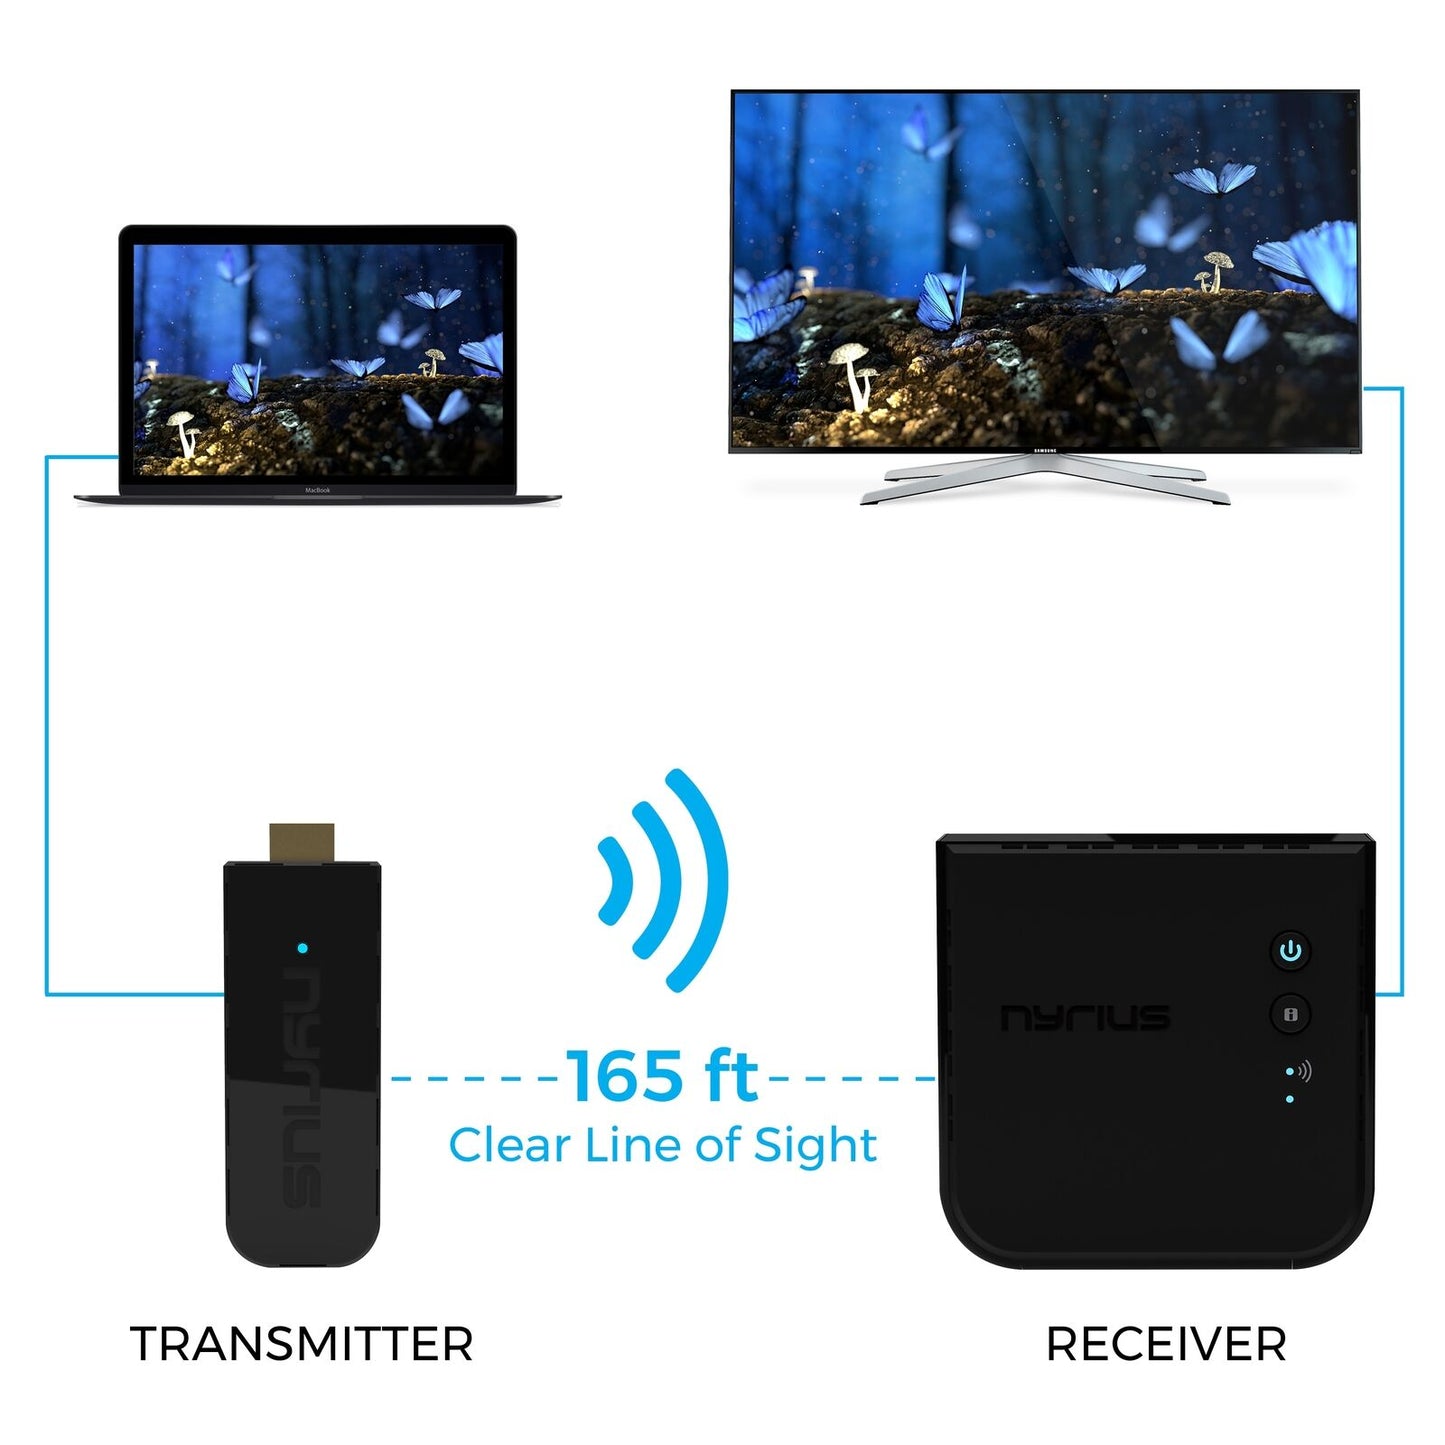 Nyrius Pro+ Wireless HDMI Video Transmitter to Stream 1080p Video up to 165ft